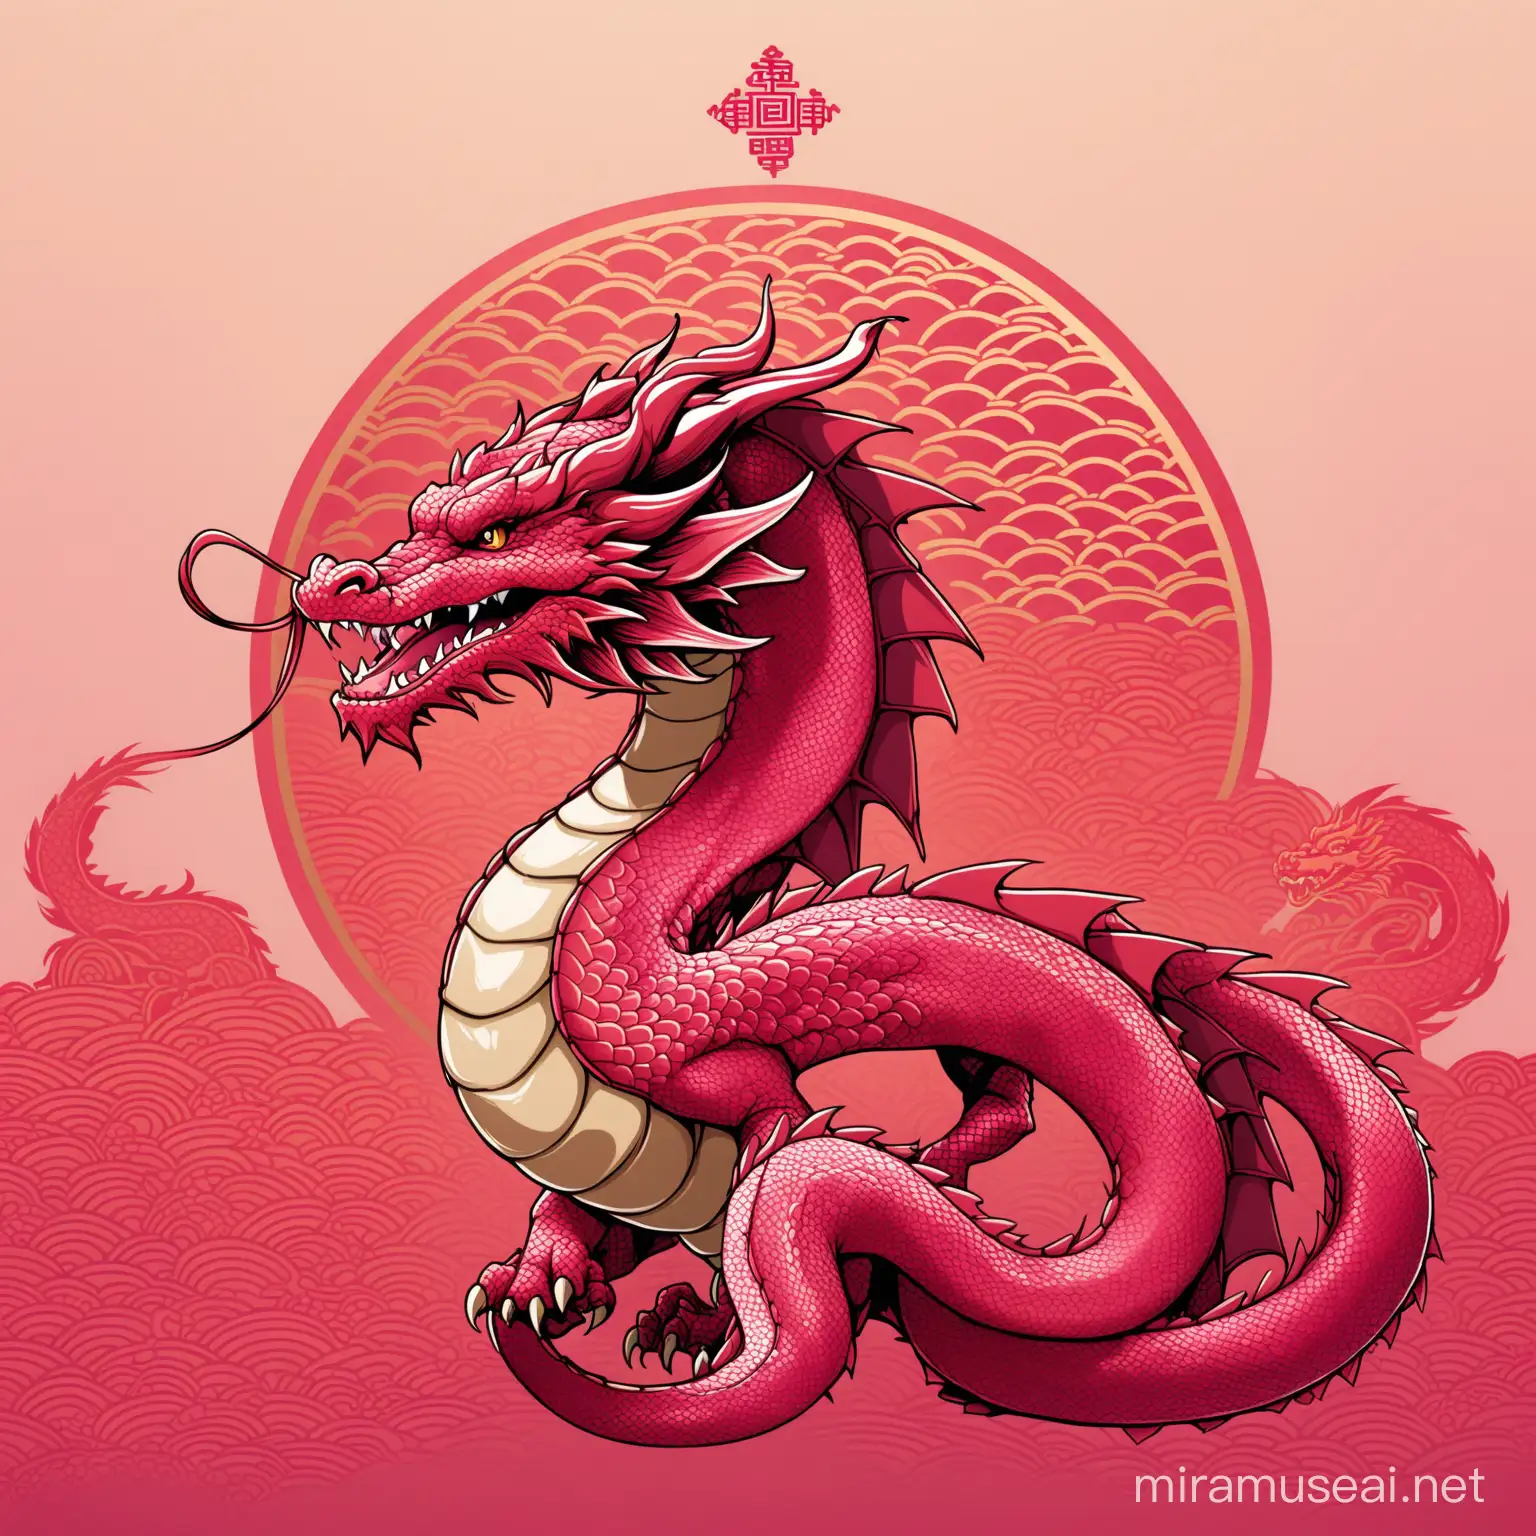 A reddish brown cute serpentine dragon against a background of pink colours and Chinese motifs; silkpunk motifs